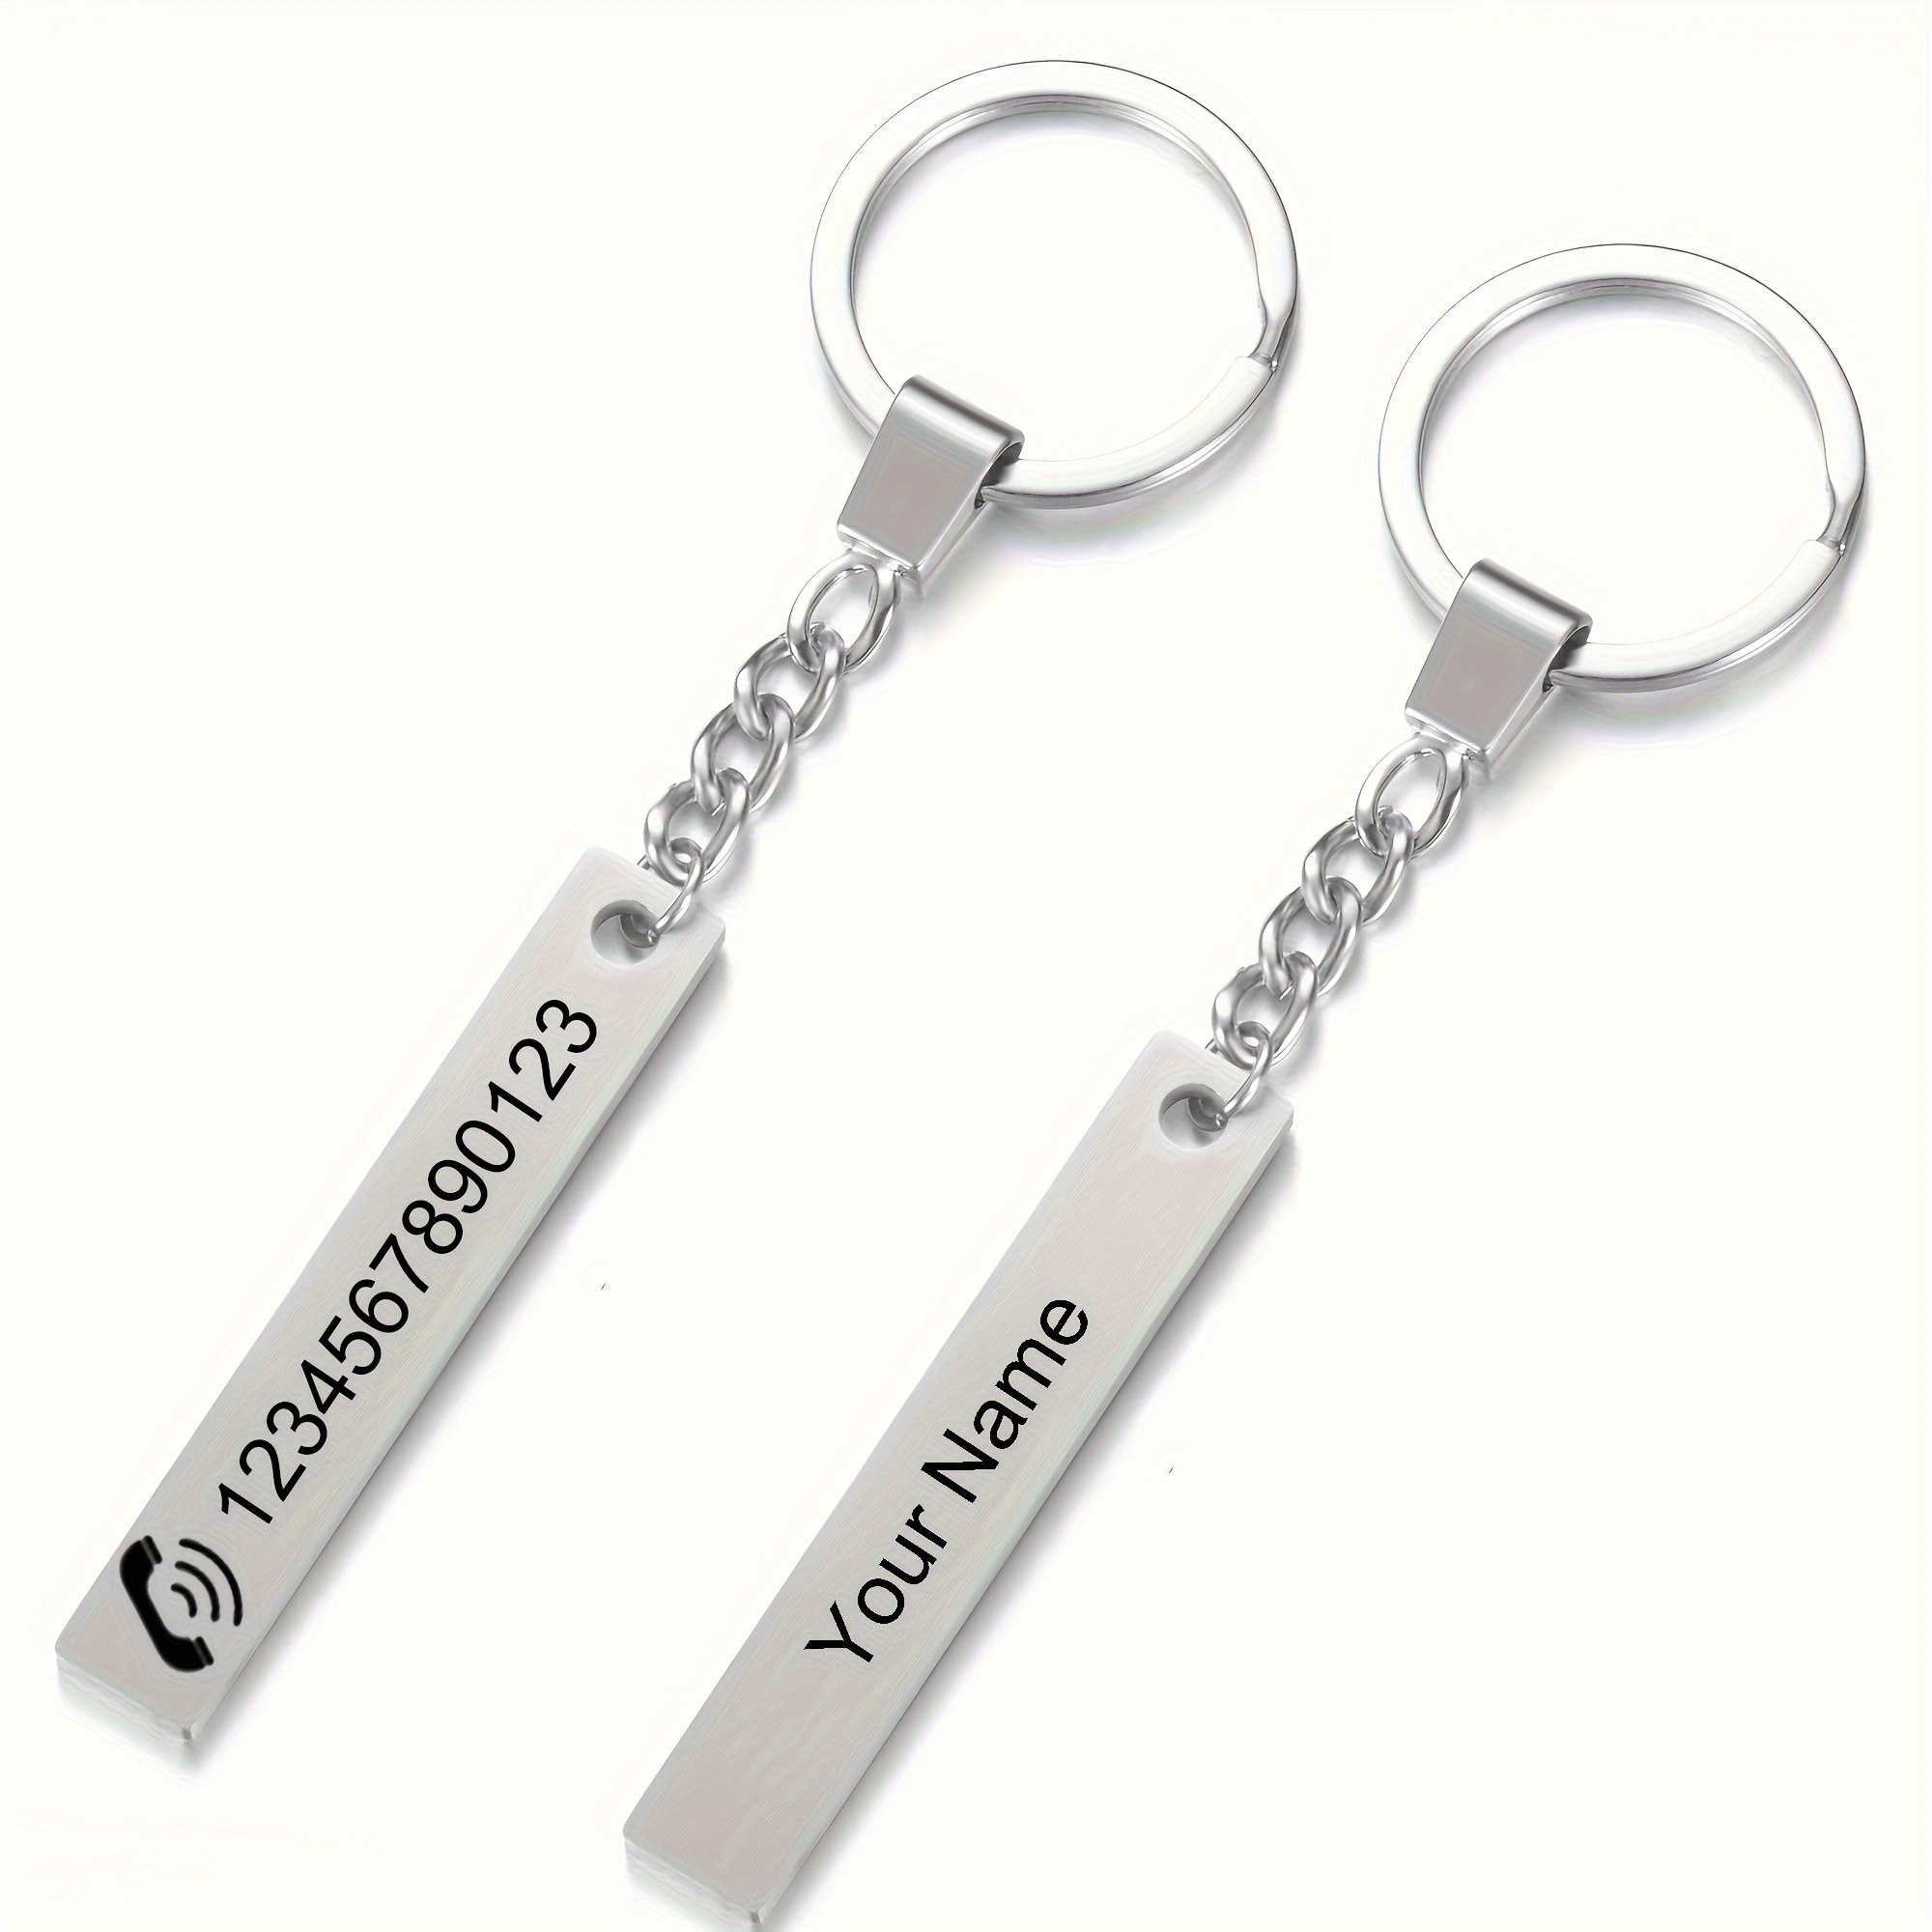 

1pc Custom Text Keychain Stainless Steel Personalized Name Tag Phone Number Key Chain Ring Anti-lost Dog Tag Bag Backpack Charm Gift